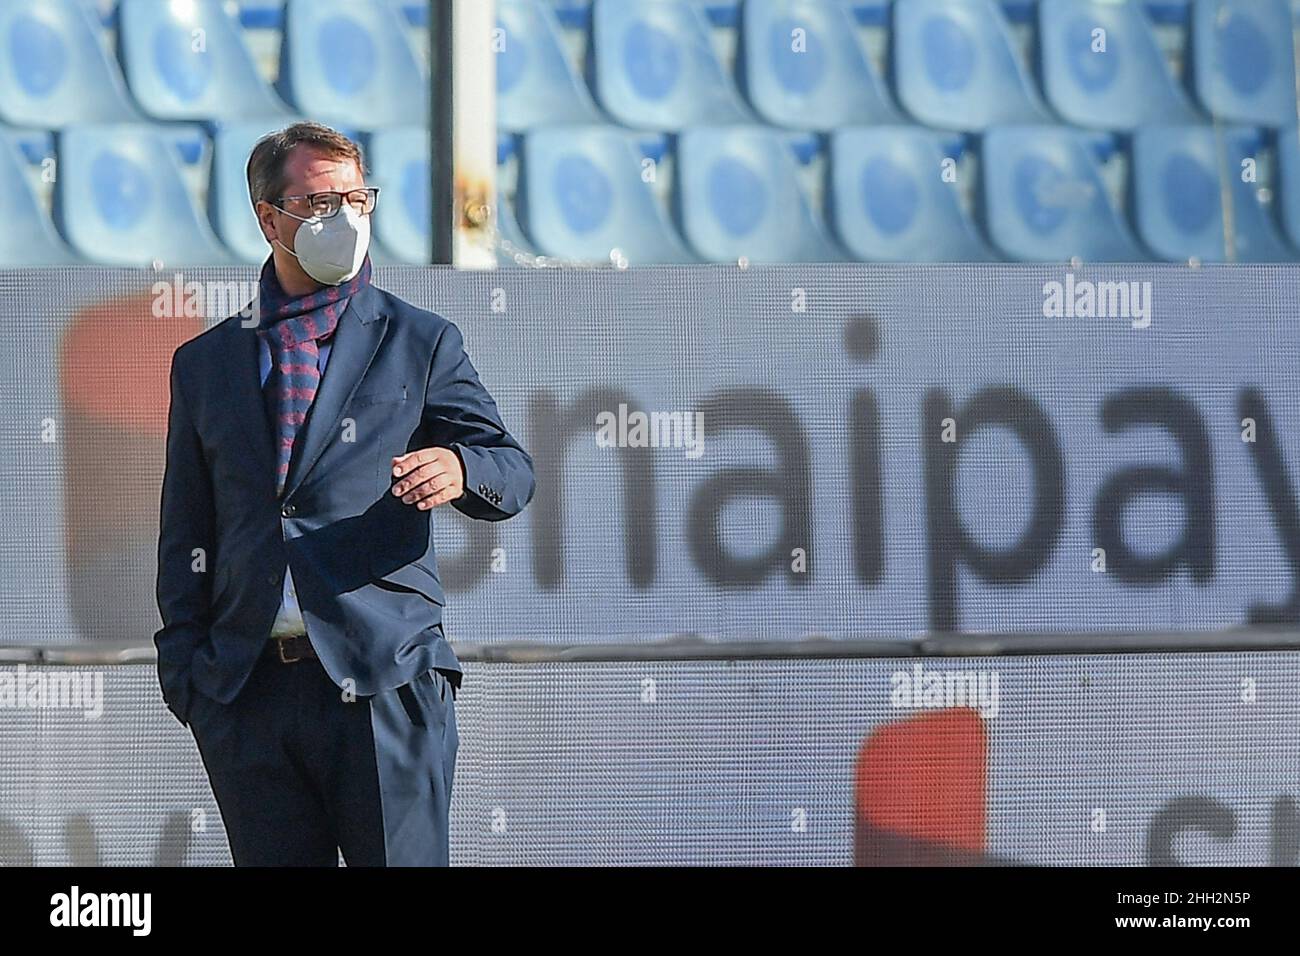 Johannes Spors football general manager of Genoa gets onto the pitch  News Photo - Getty Images